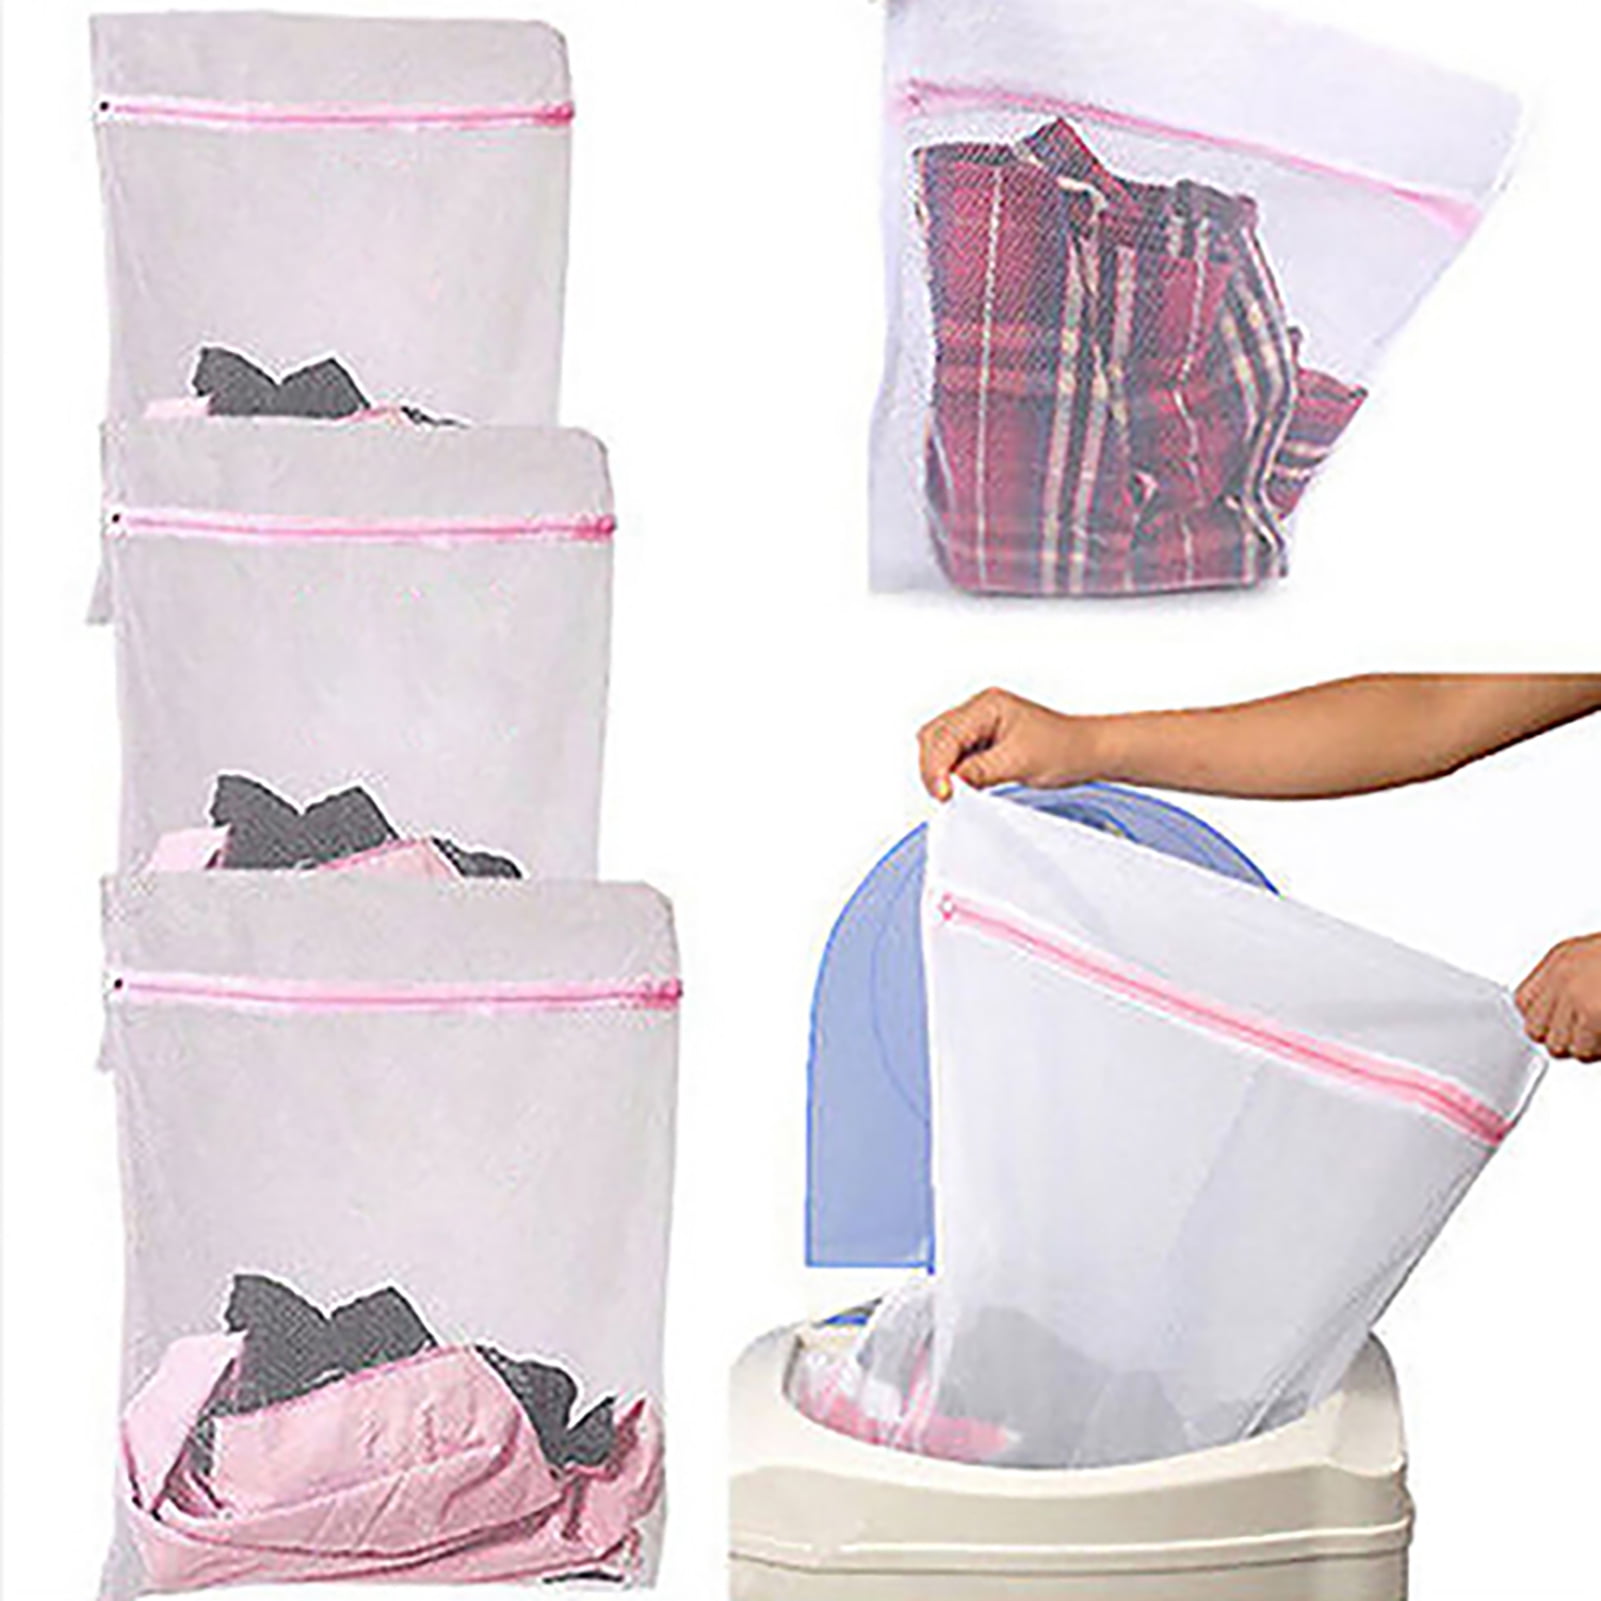 Mesh Laundry Bag Set of 6, White Delicate Durable Polyester Wash